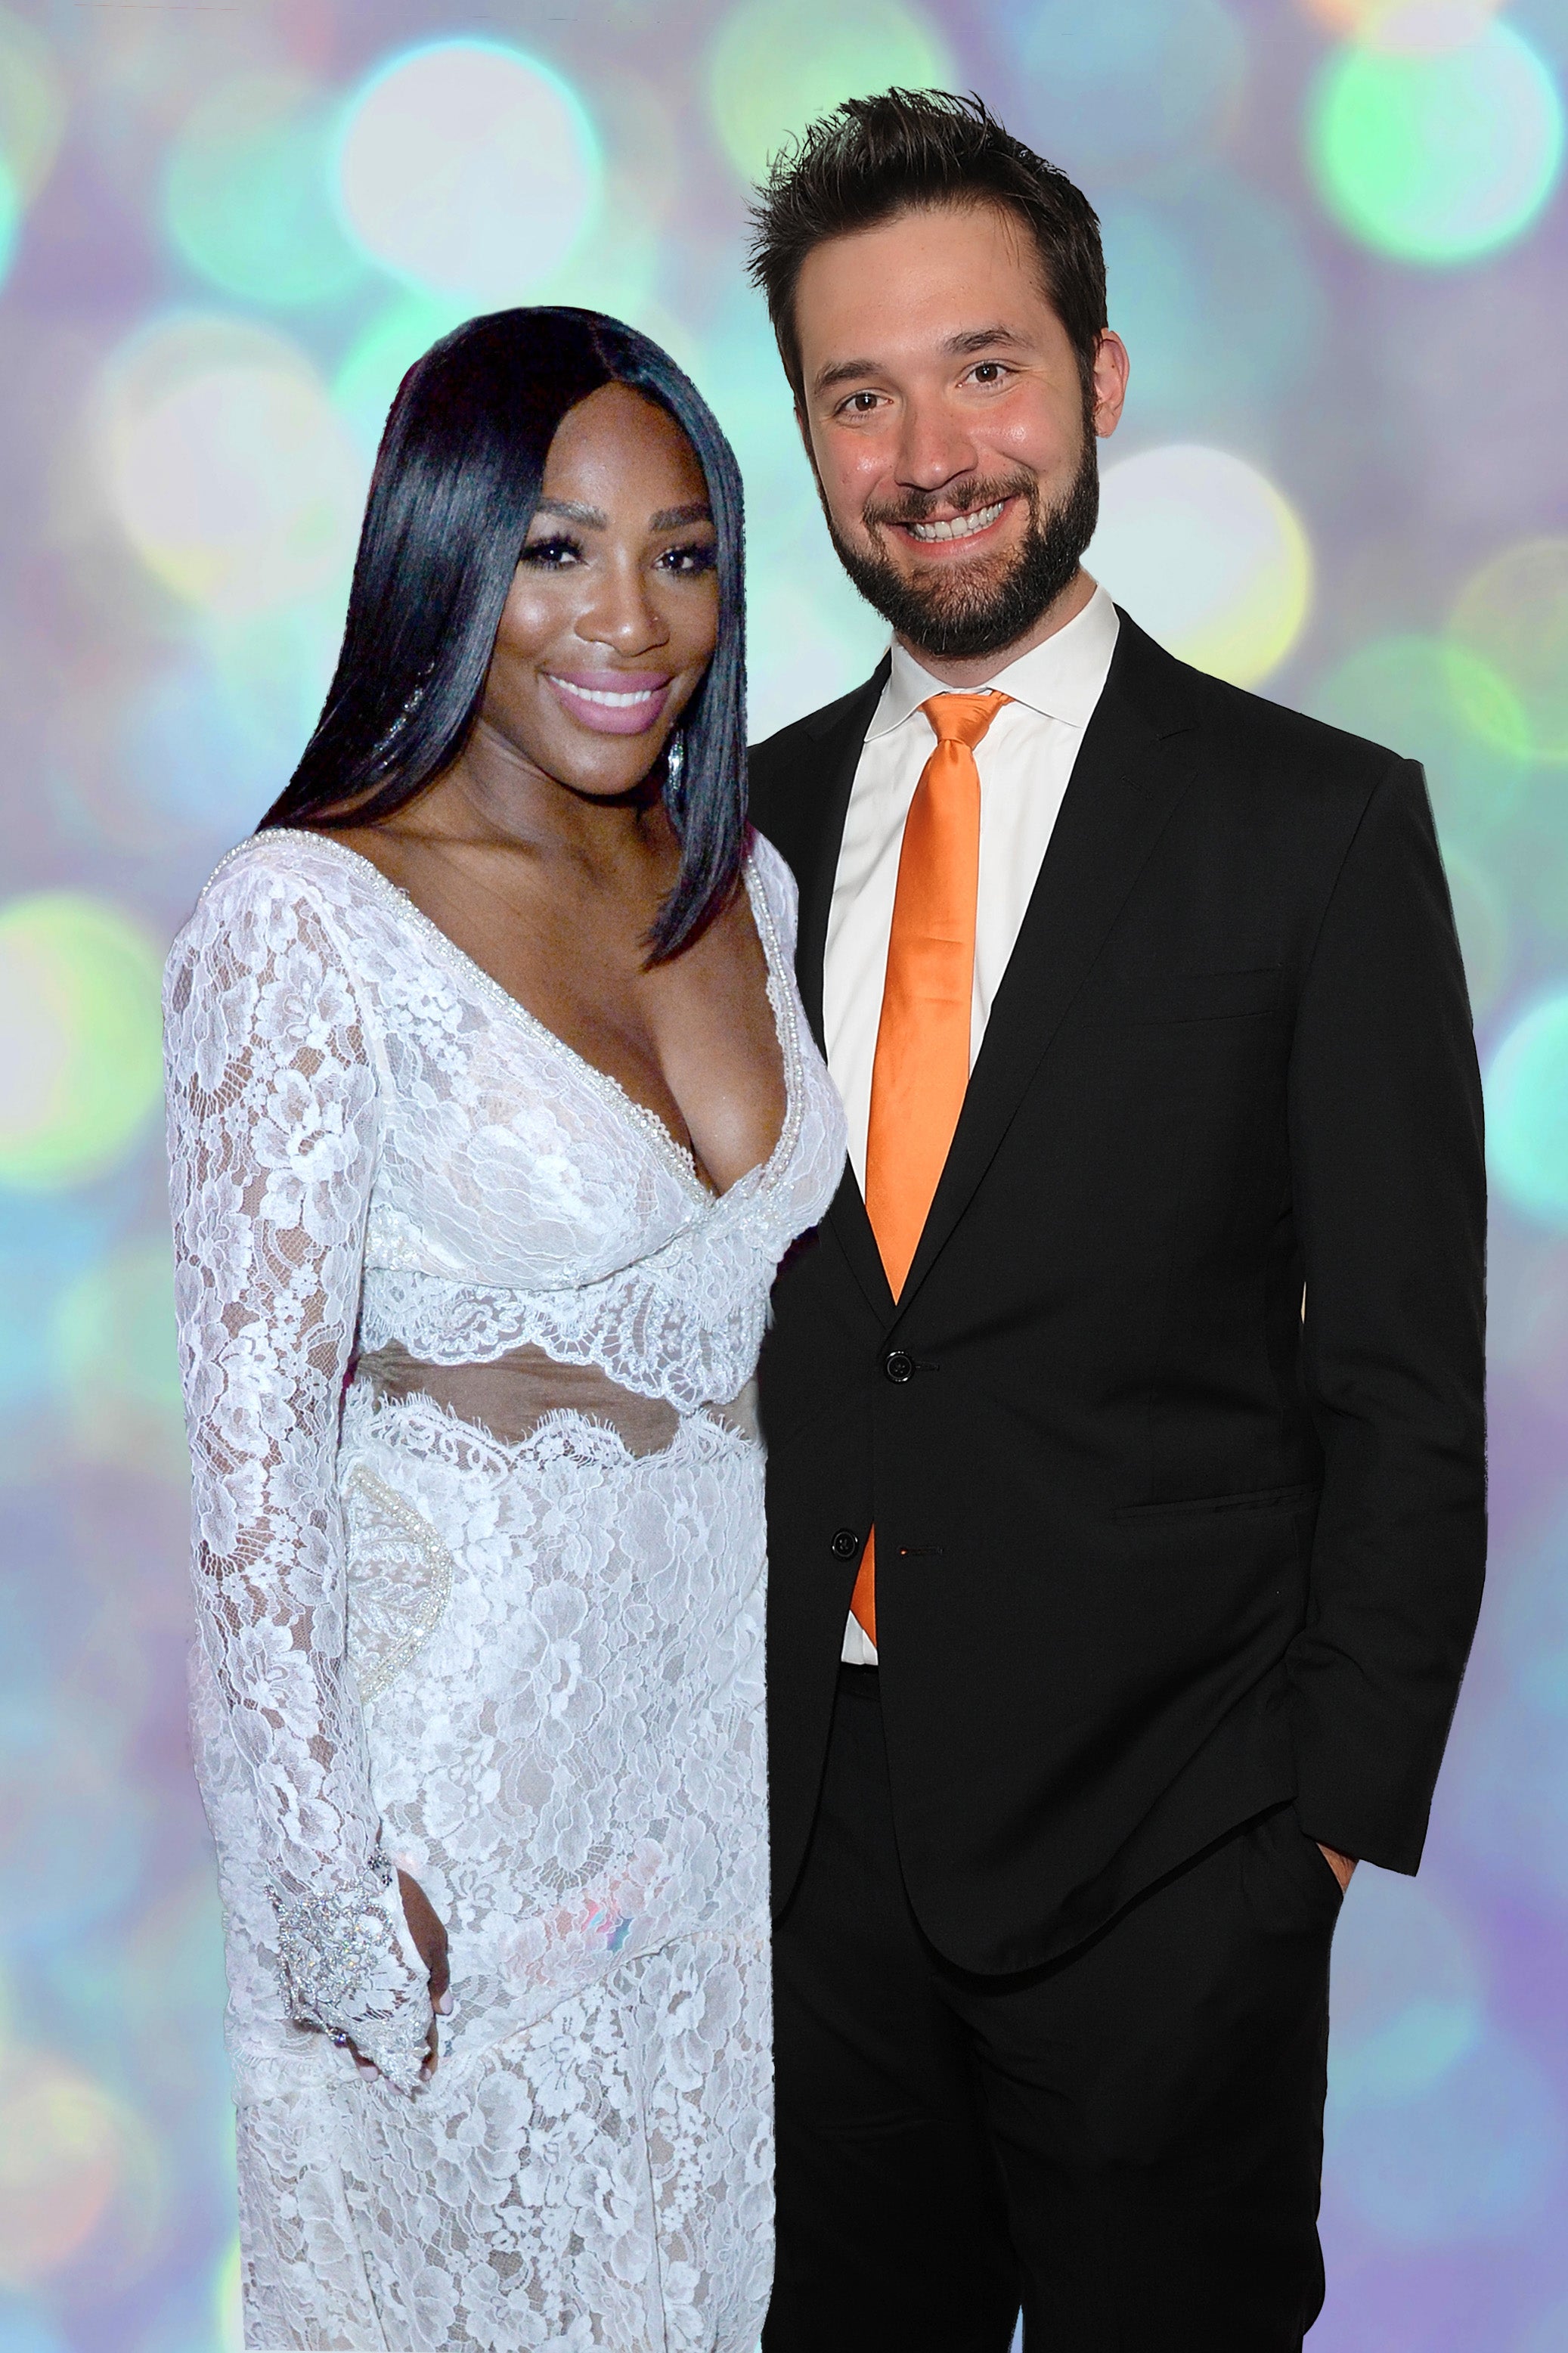 Serena Williams On Finding Love In An Unexpected Place: 'I Never Thought I Would Have Married A White Guy'
